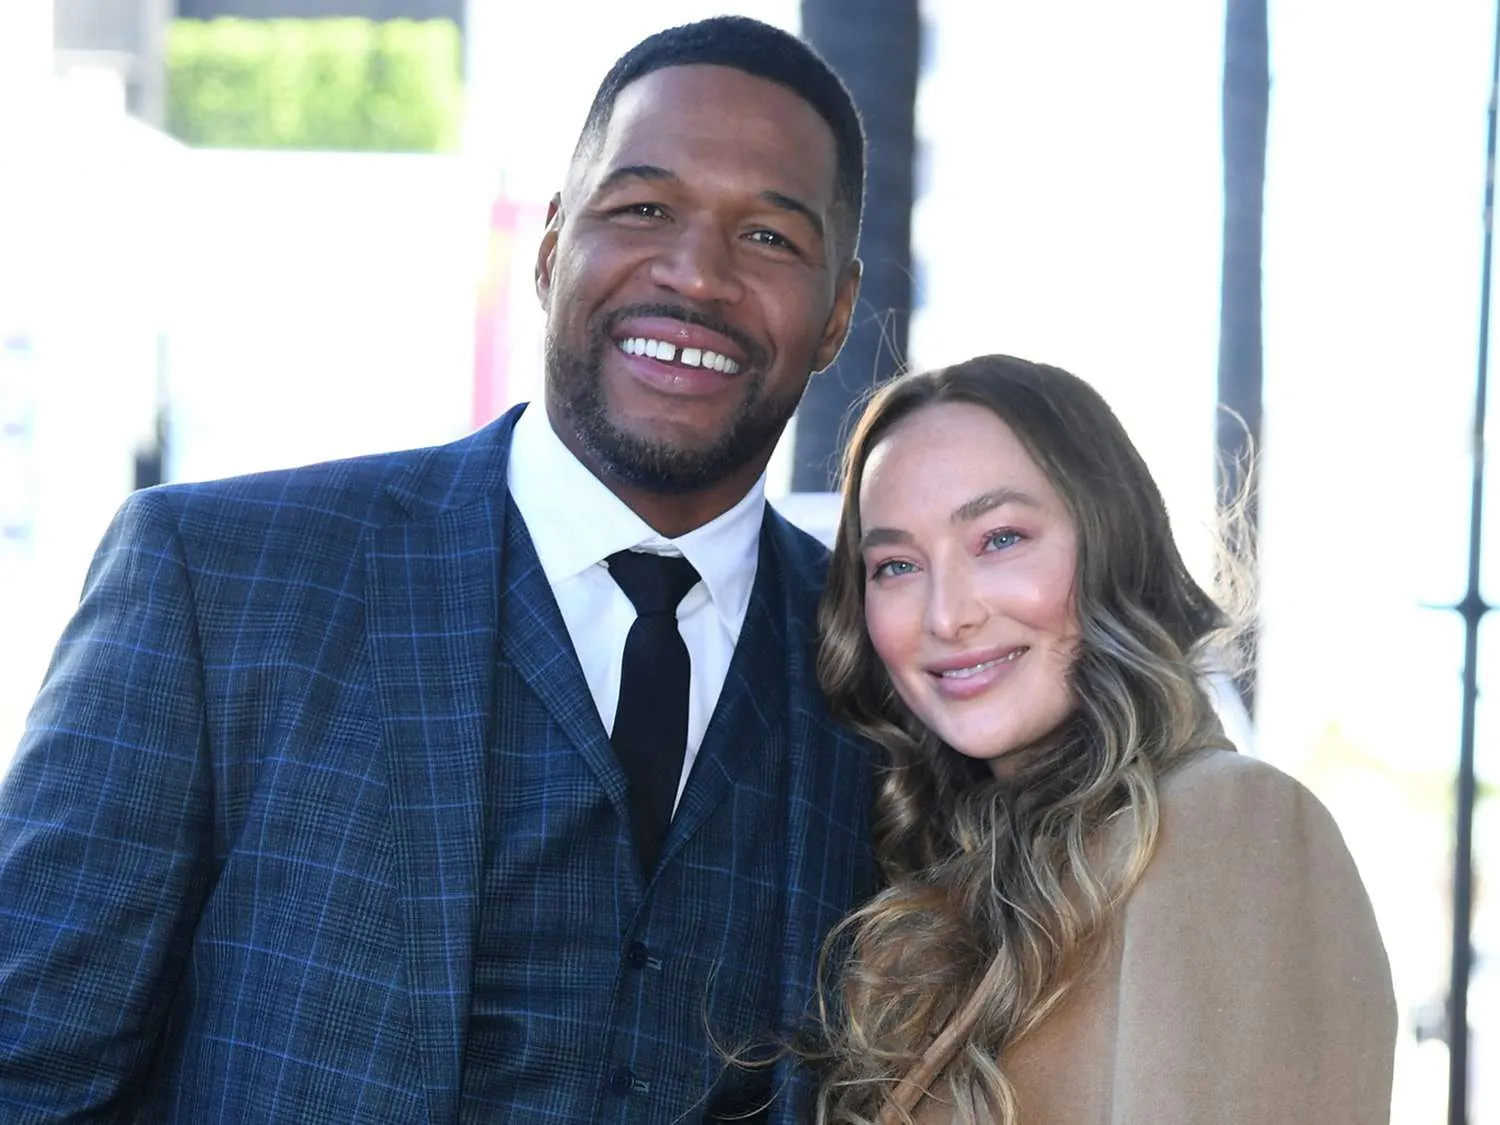 Who Is Michael Strahan Dating?